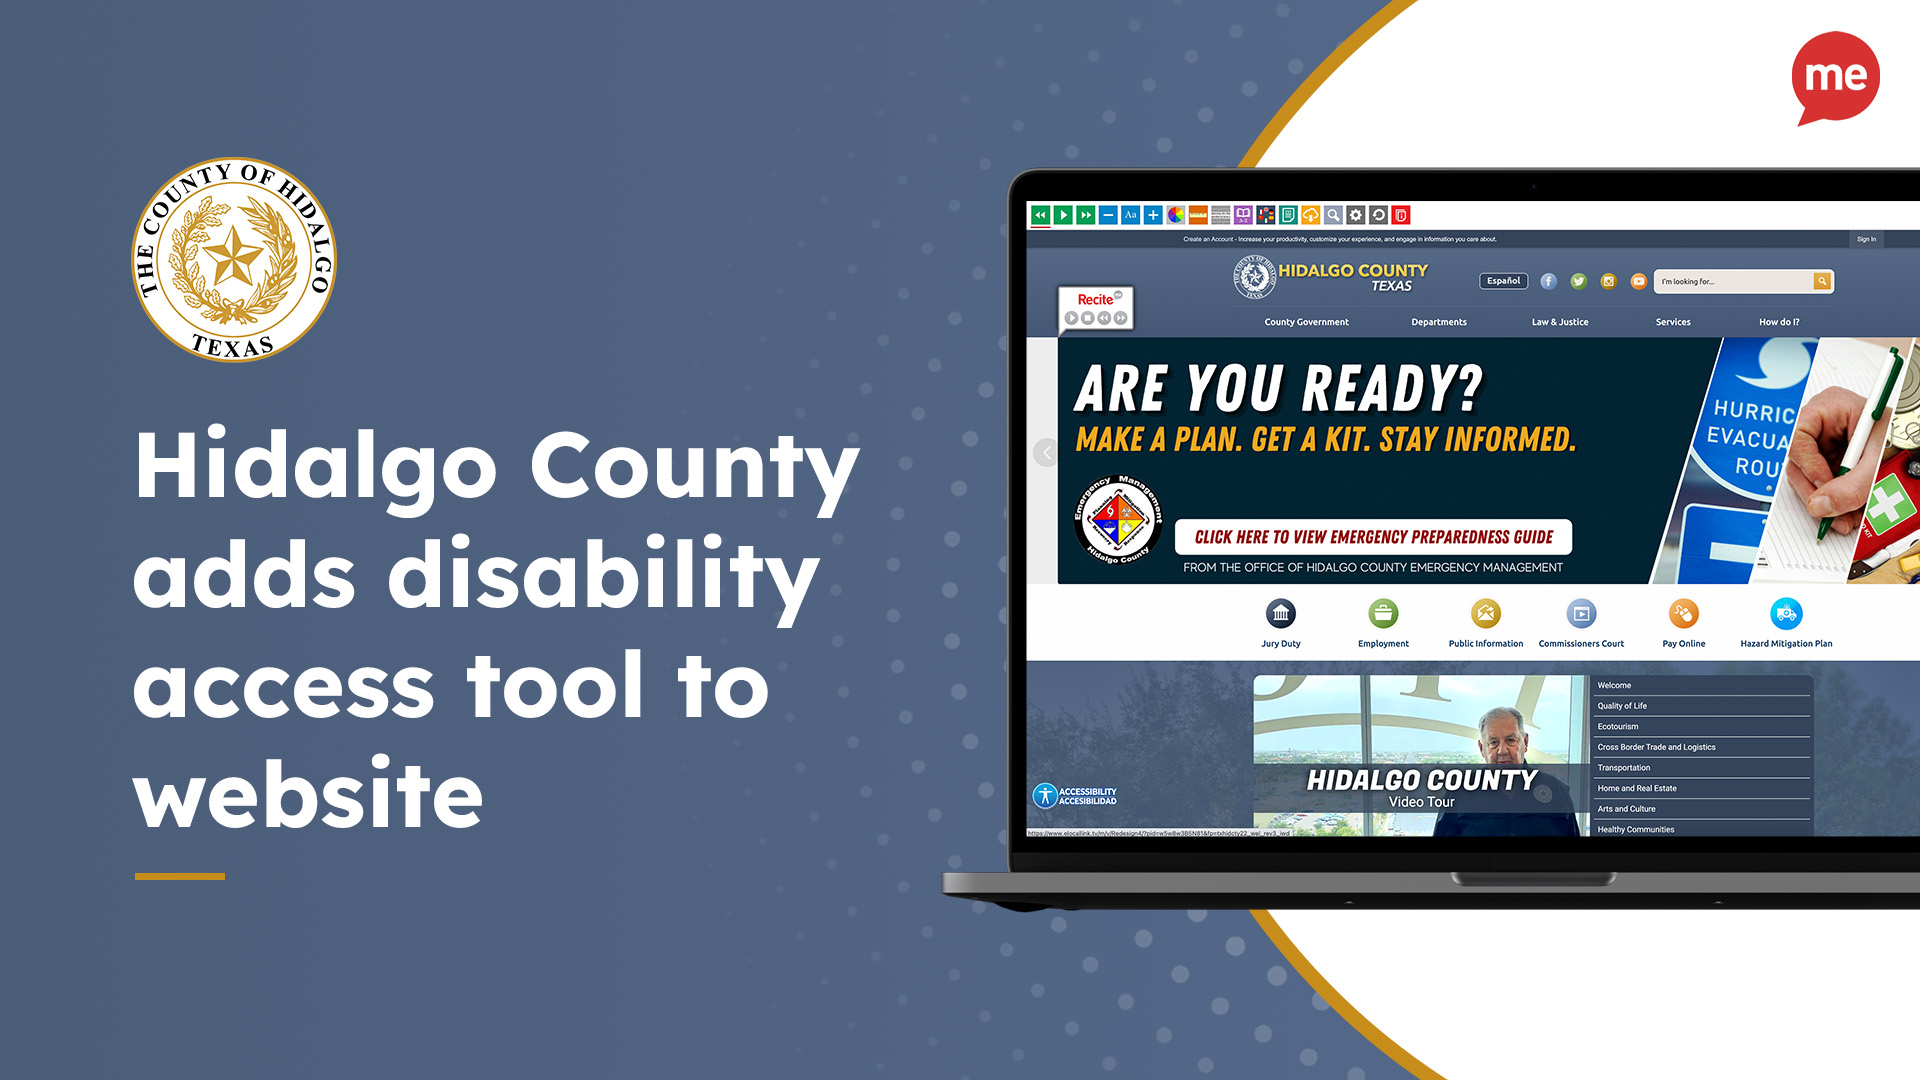 Hidalgo County adds disability access tool to website